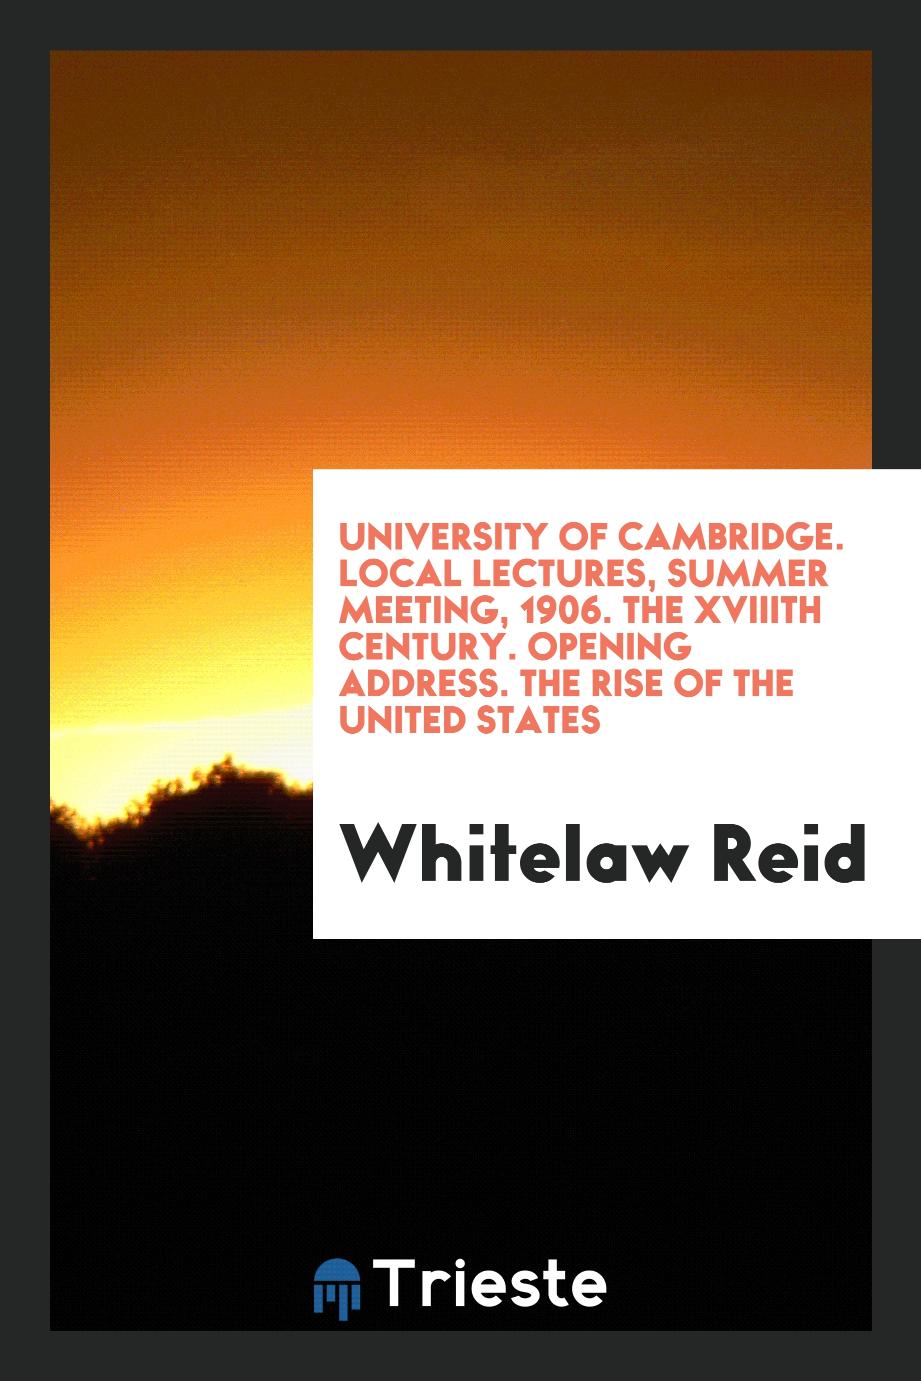 University of Cambridge. Local Lectures, Summer Meeting, 1906. The XVIIIth Century. Opening Address. The Rise of the United States